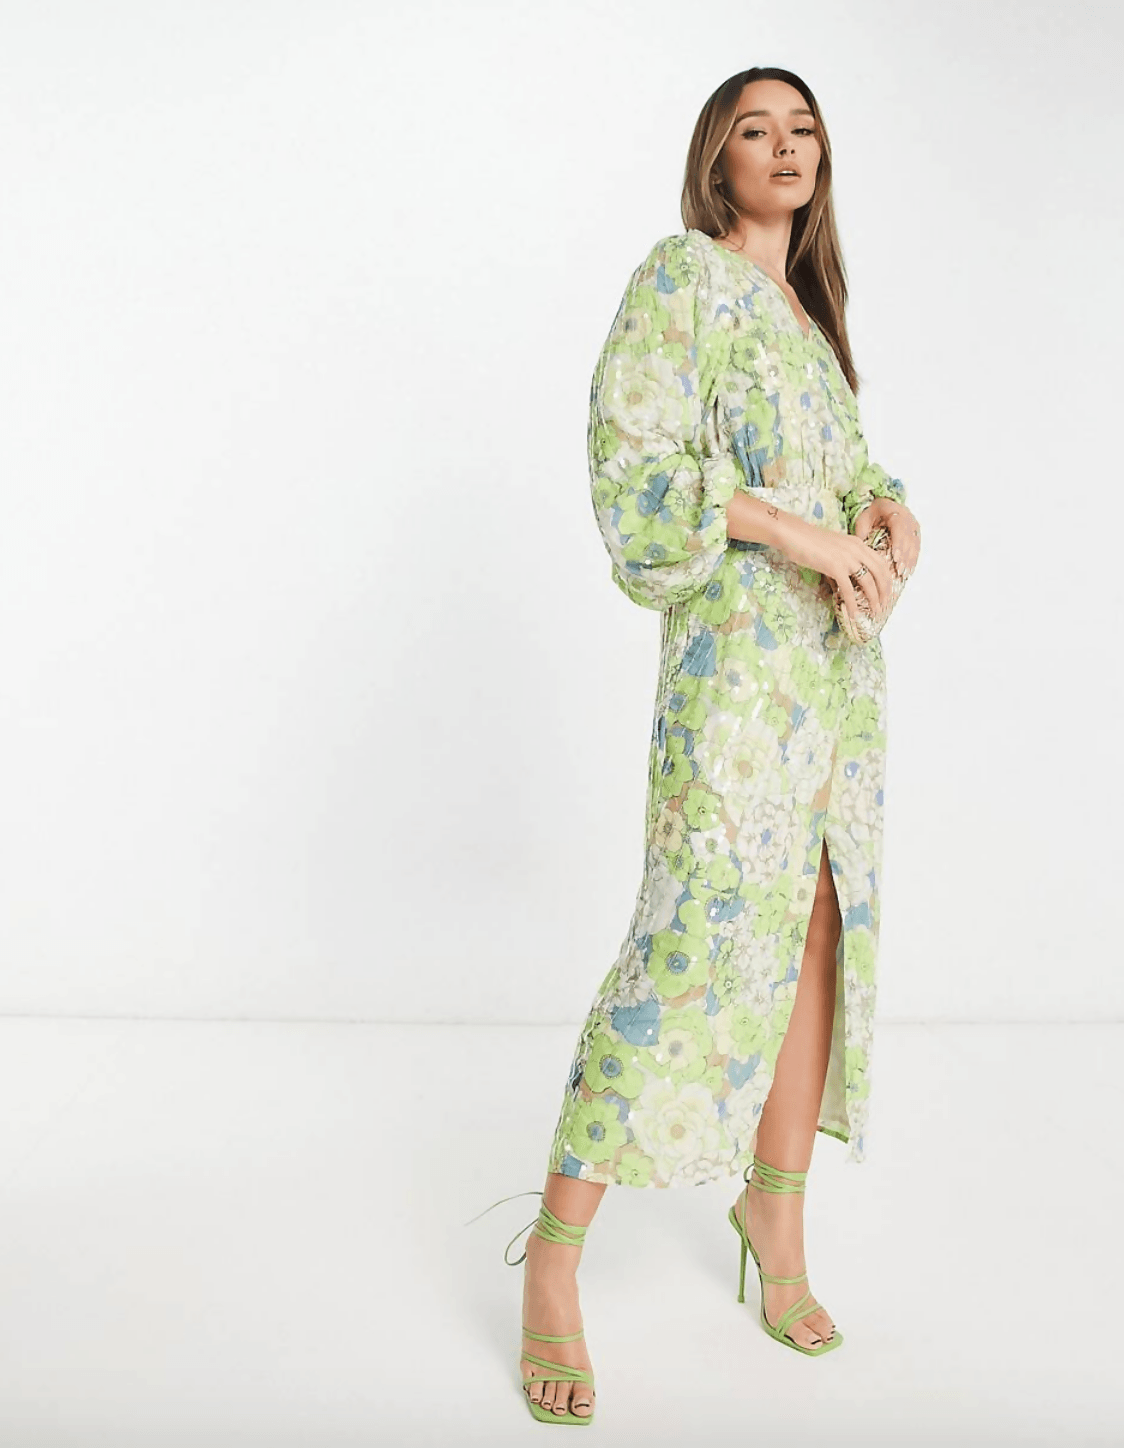 ASOS EDITION Sequin Wrap Midi Dress in Floral Print - Endless